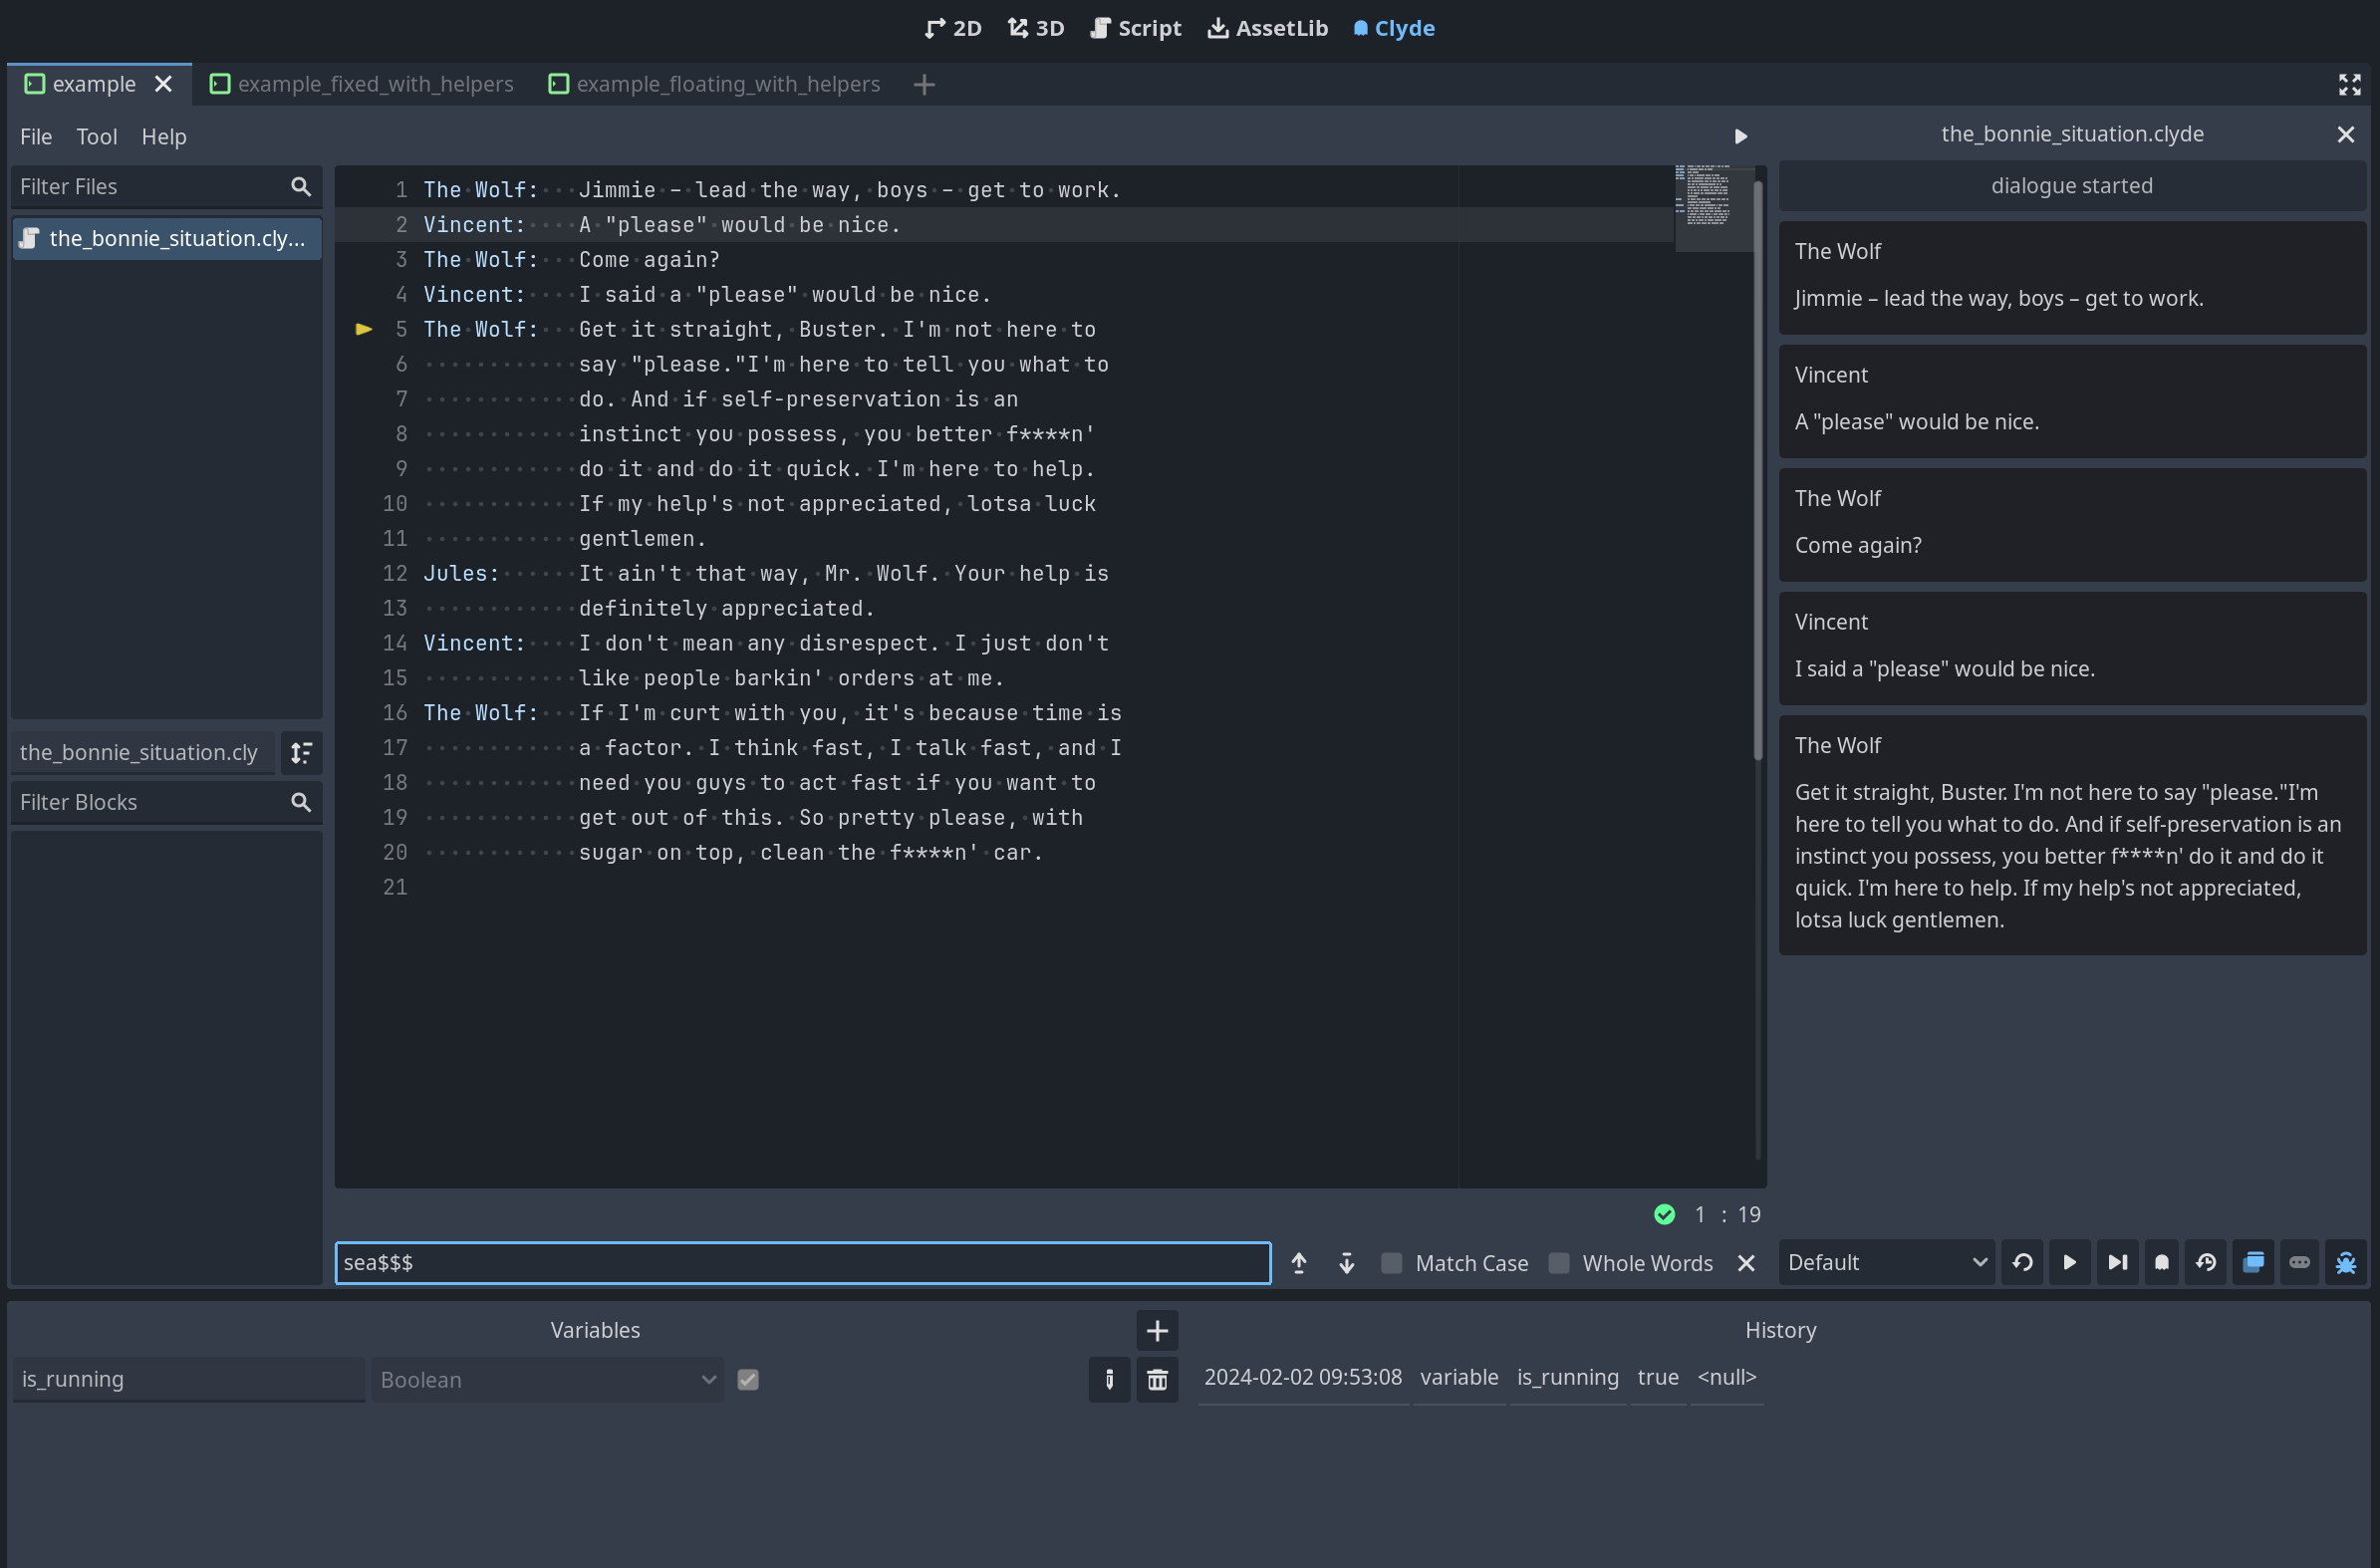 Clyde editor screenshot with dialogue file example